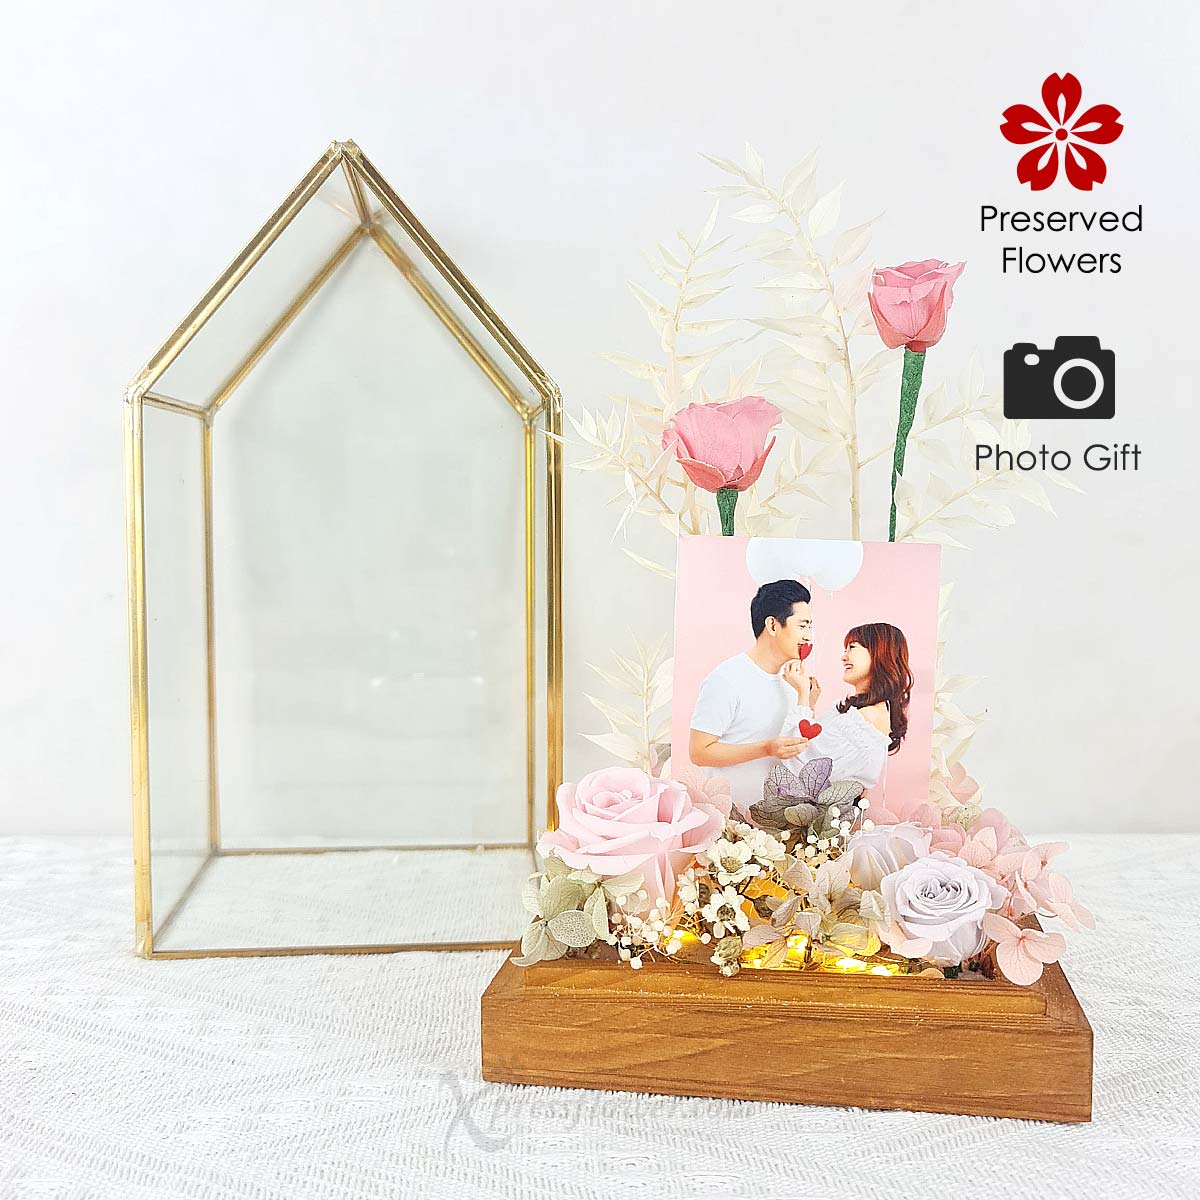 PR2304 Romance Mansion Preserved Flowers with Personalised Photo) 1B